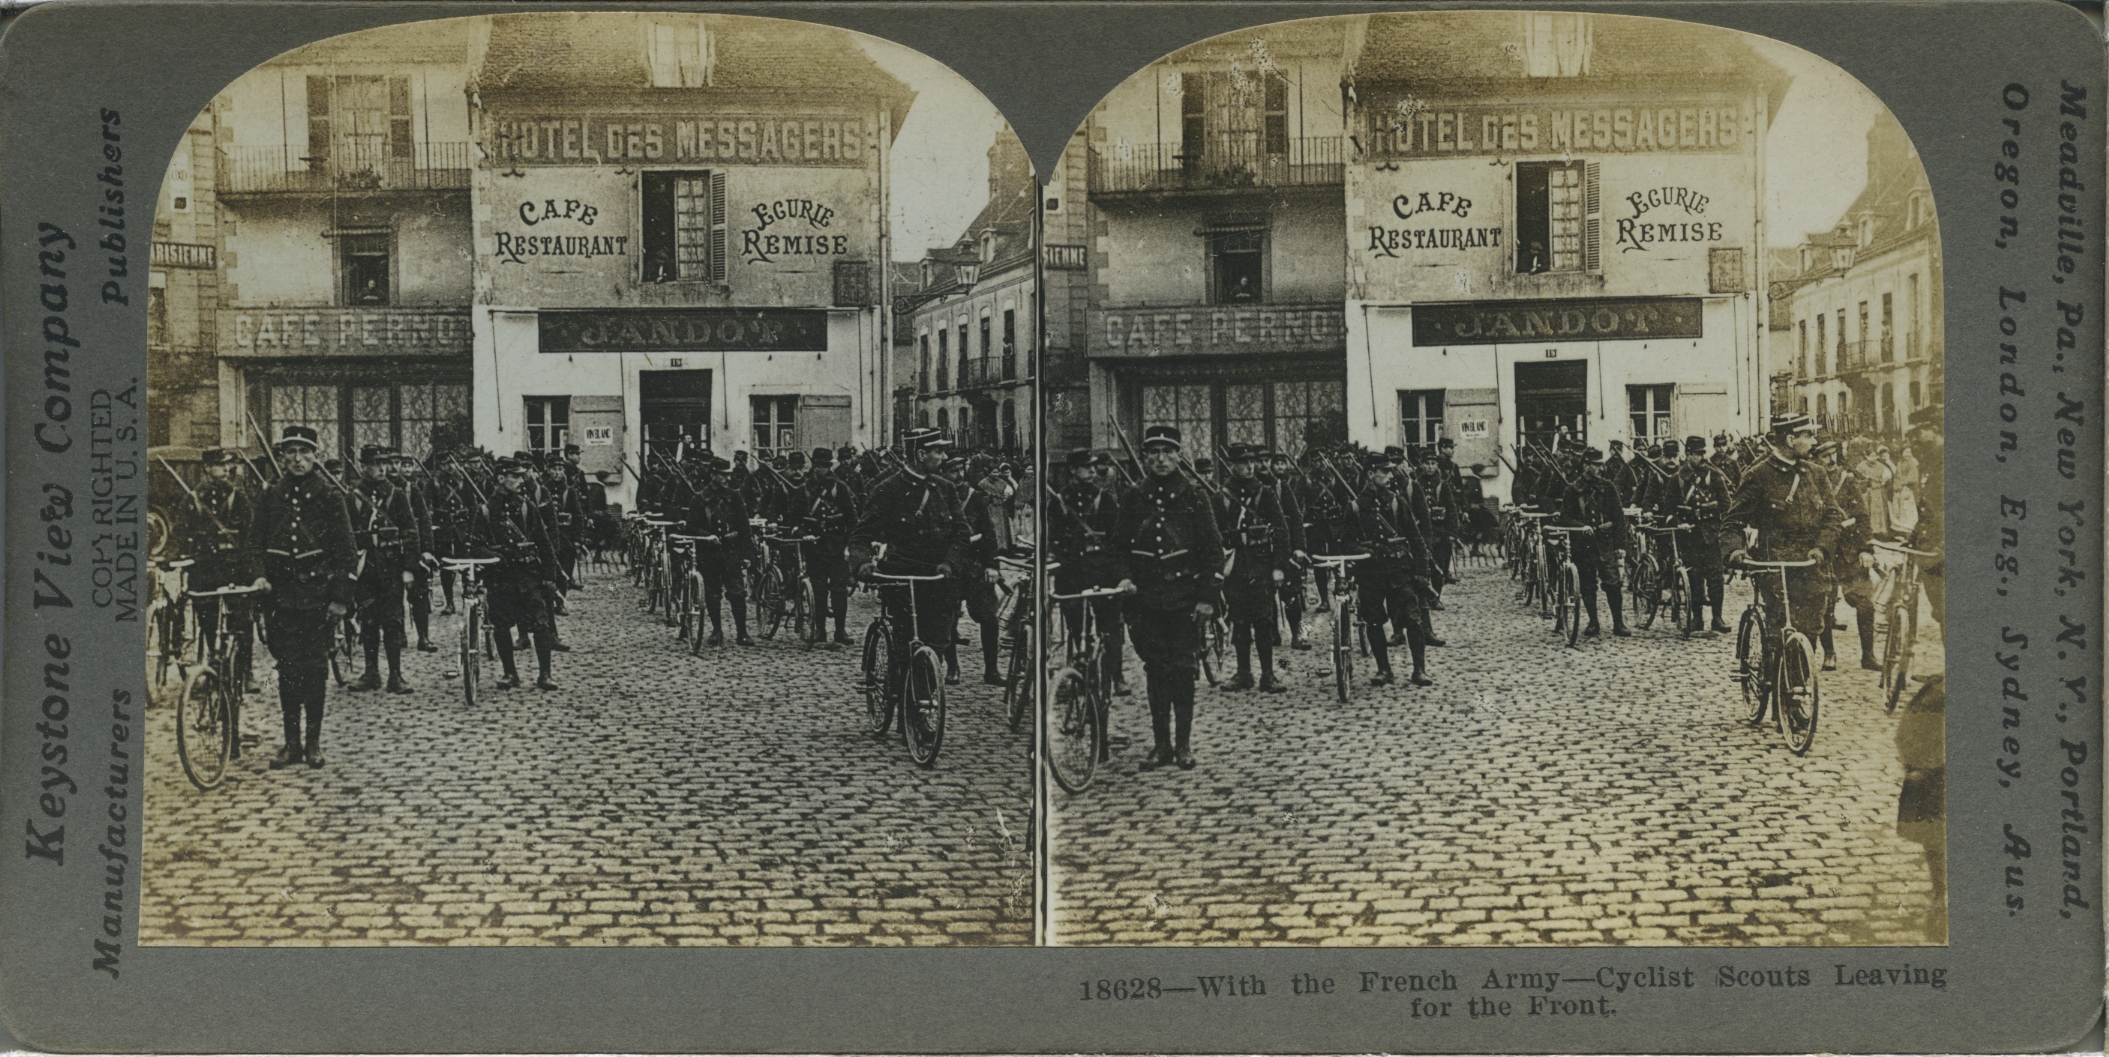 With the French Army - Cyclist Scouts Leaving for the Front